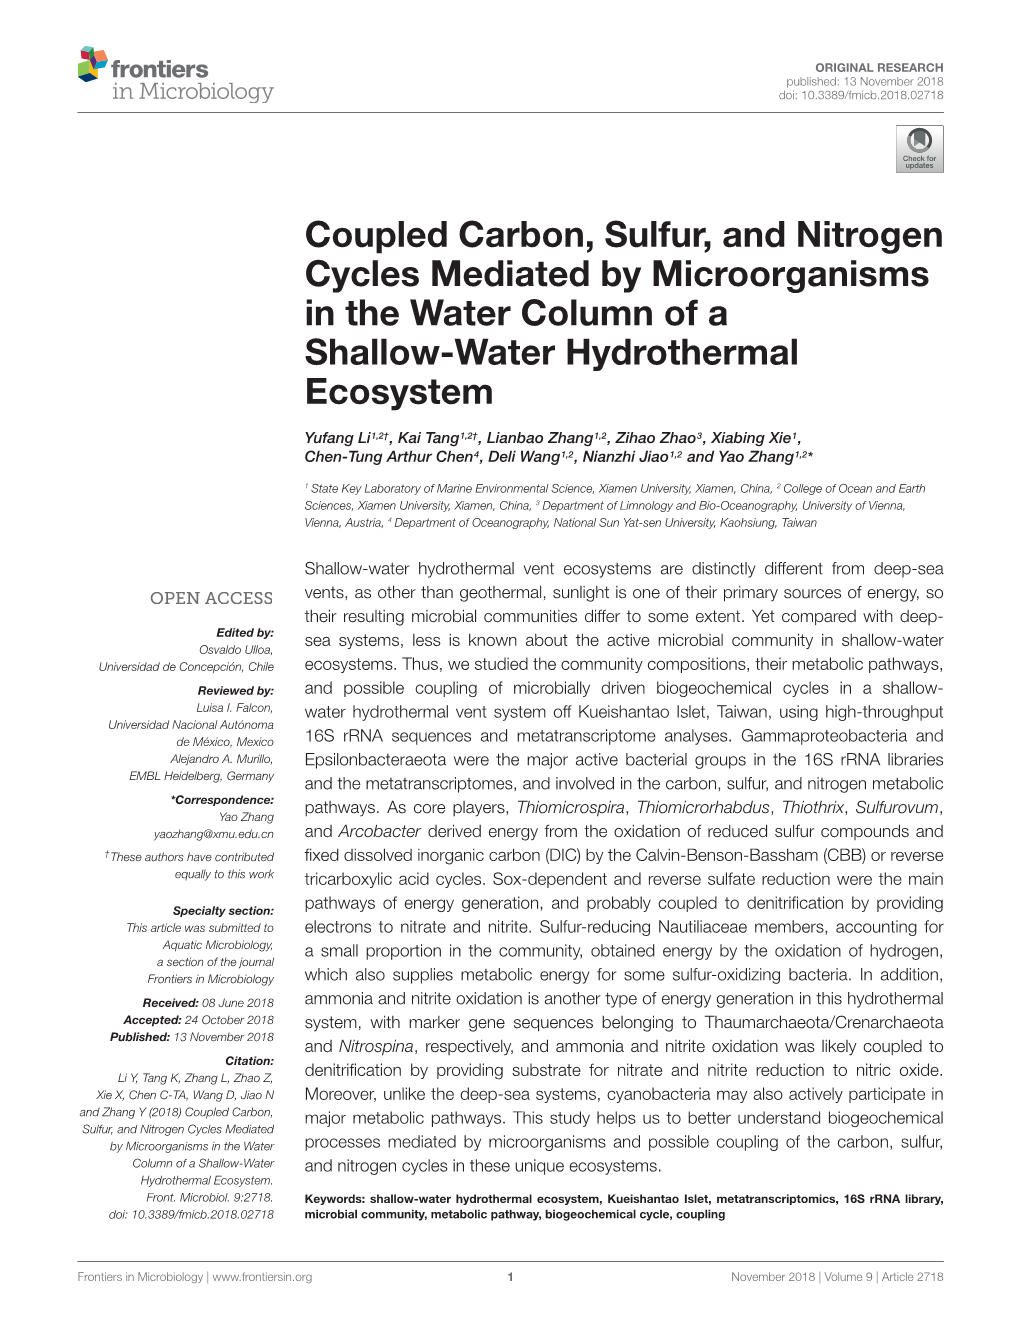 Coupled Carbon, Sulfur, and Nitrogen Cycles Mediated by Microorganisms in the Water Column of a Shallow-Water Hydrothermal Ecosystem